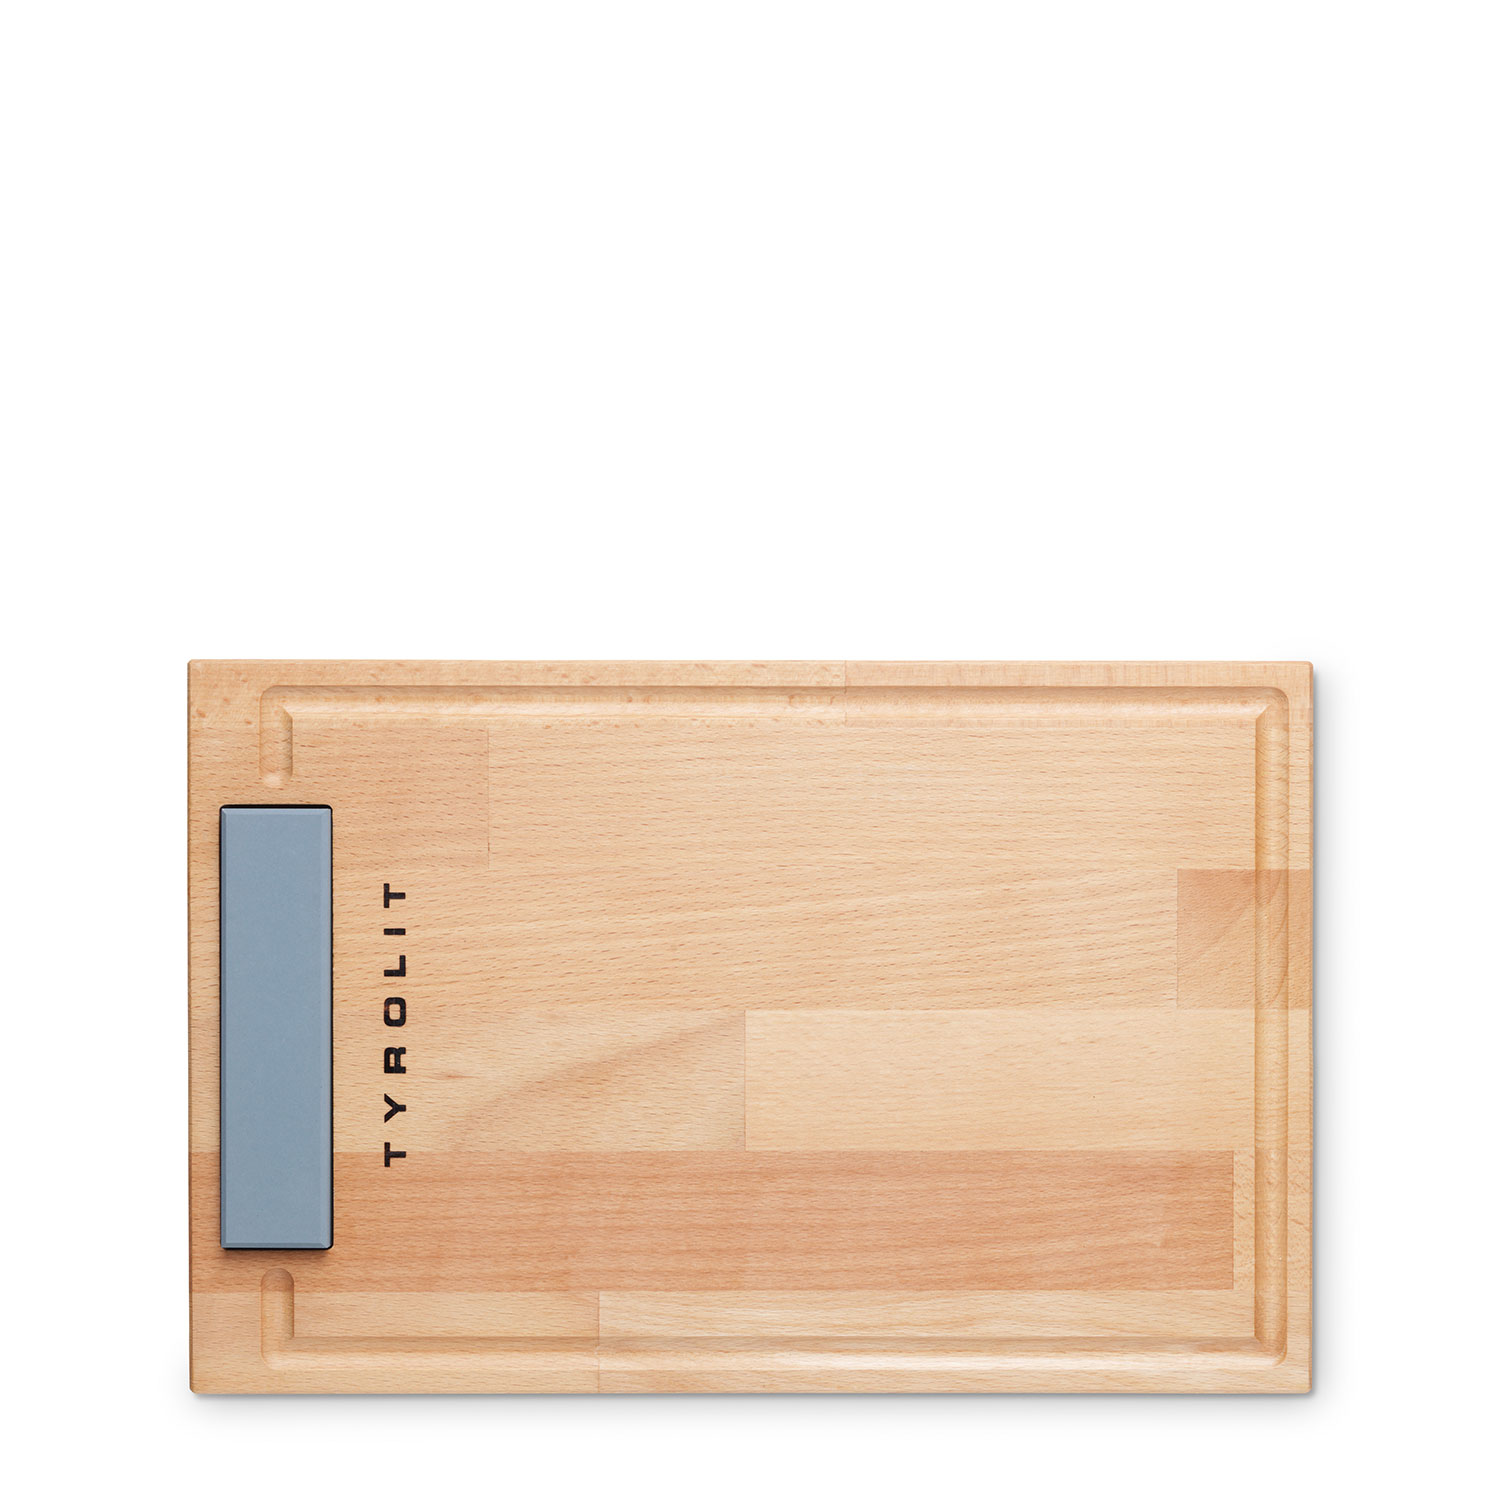 TYROLIT life Cutting Board Plus with sharpening stone